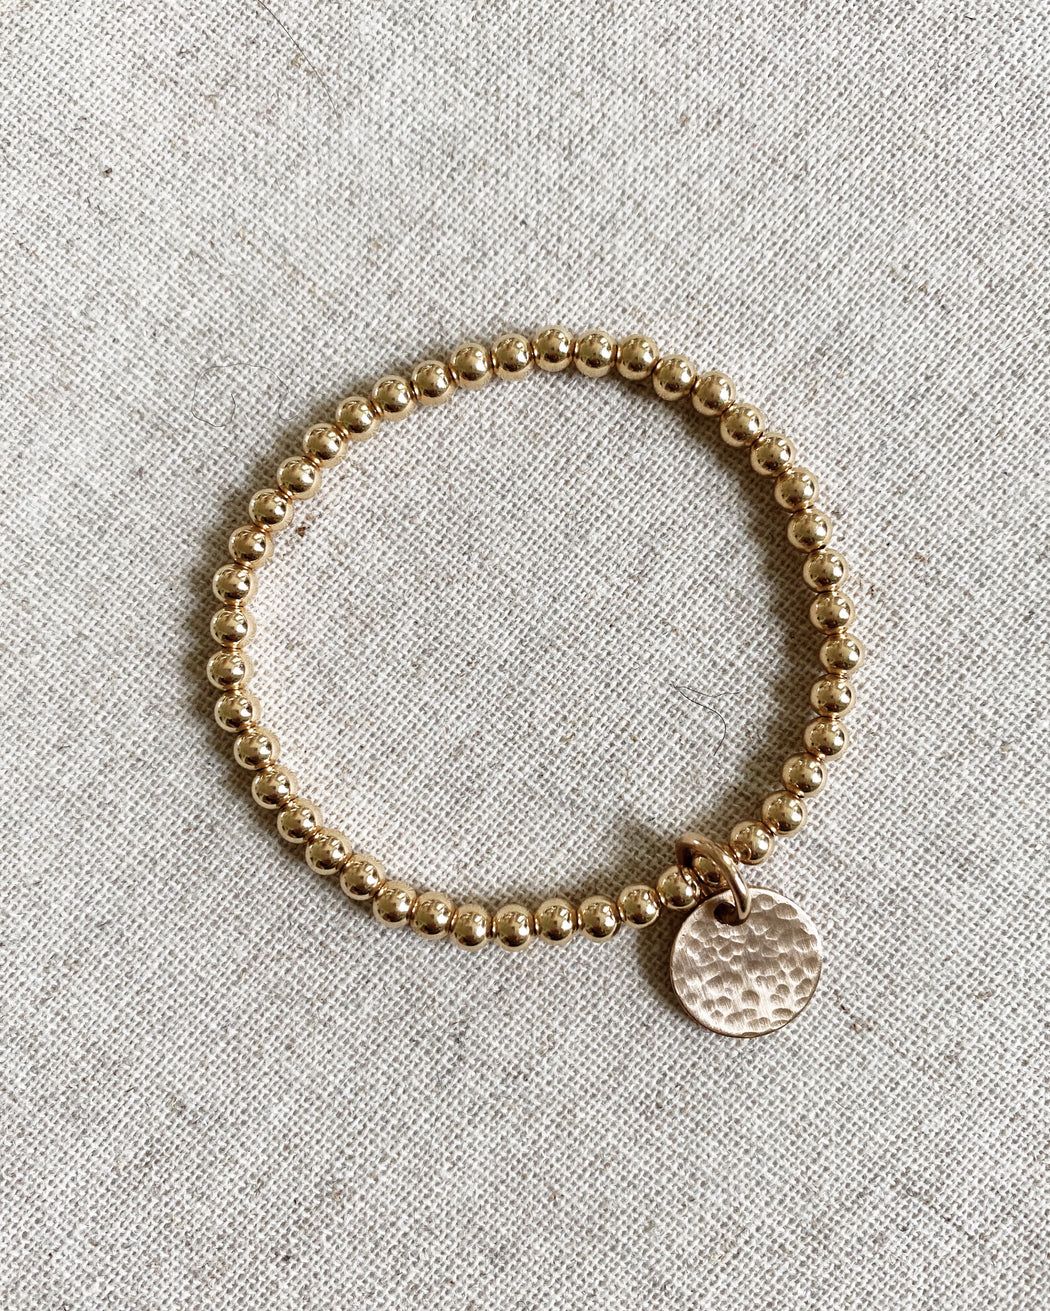 THE HAMMERED COIN BEADED BRACELET - GOLD5mm Beads / Petite (6 1/8) | Stylin by Aylin